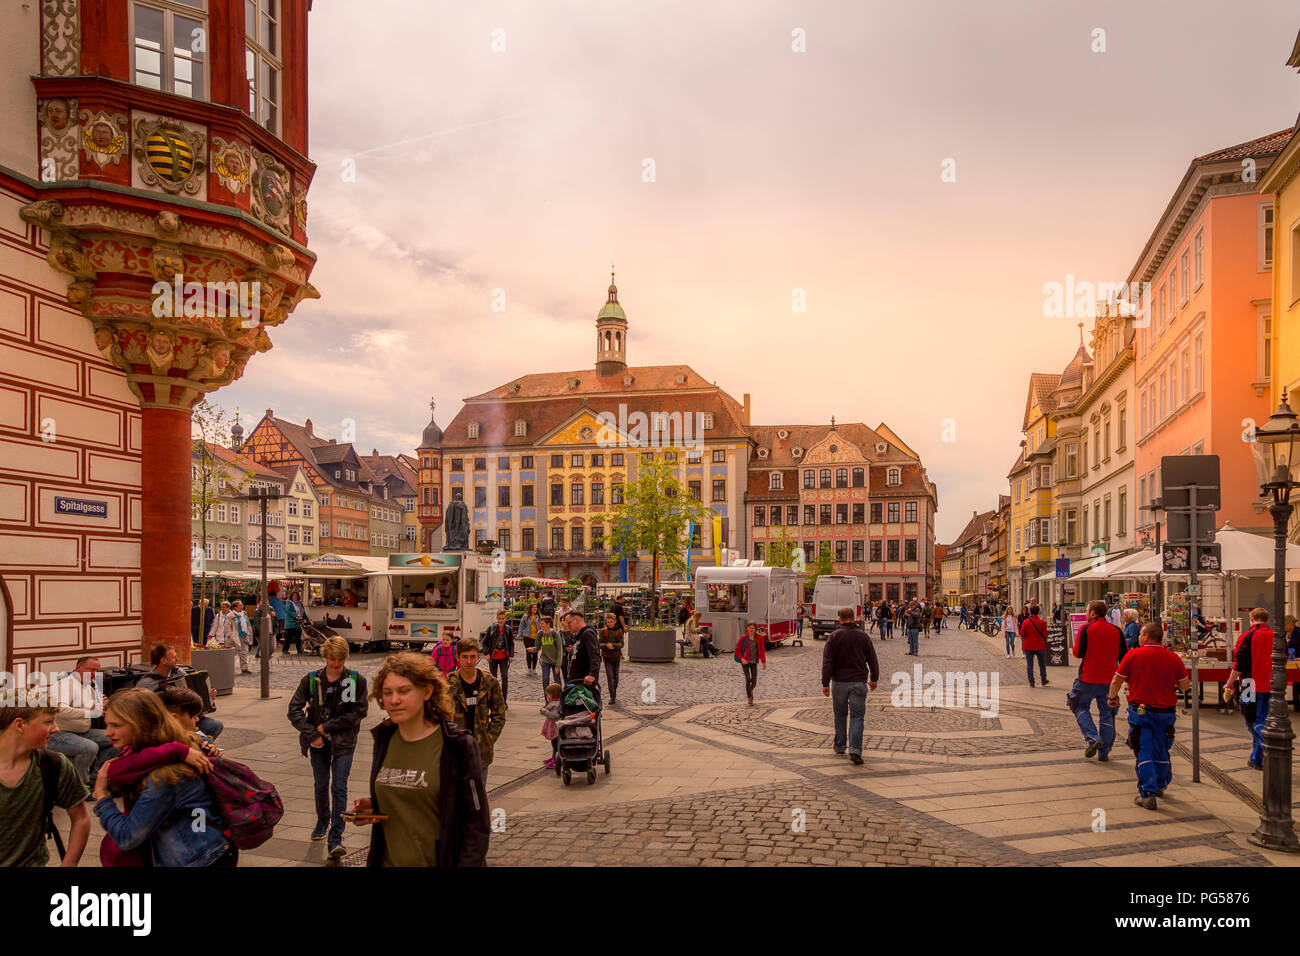 The market square of Coburg on May 2, 2018. Coburg is a german city in the state of Bavaria. In the center you see the town hall. Stock Photo